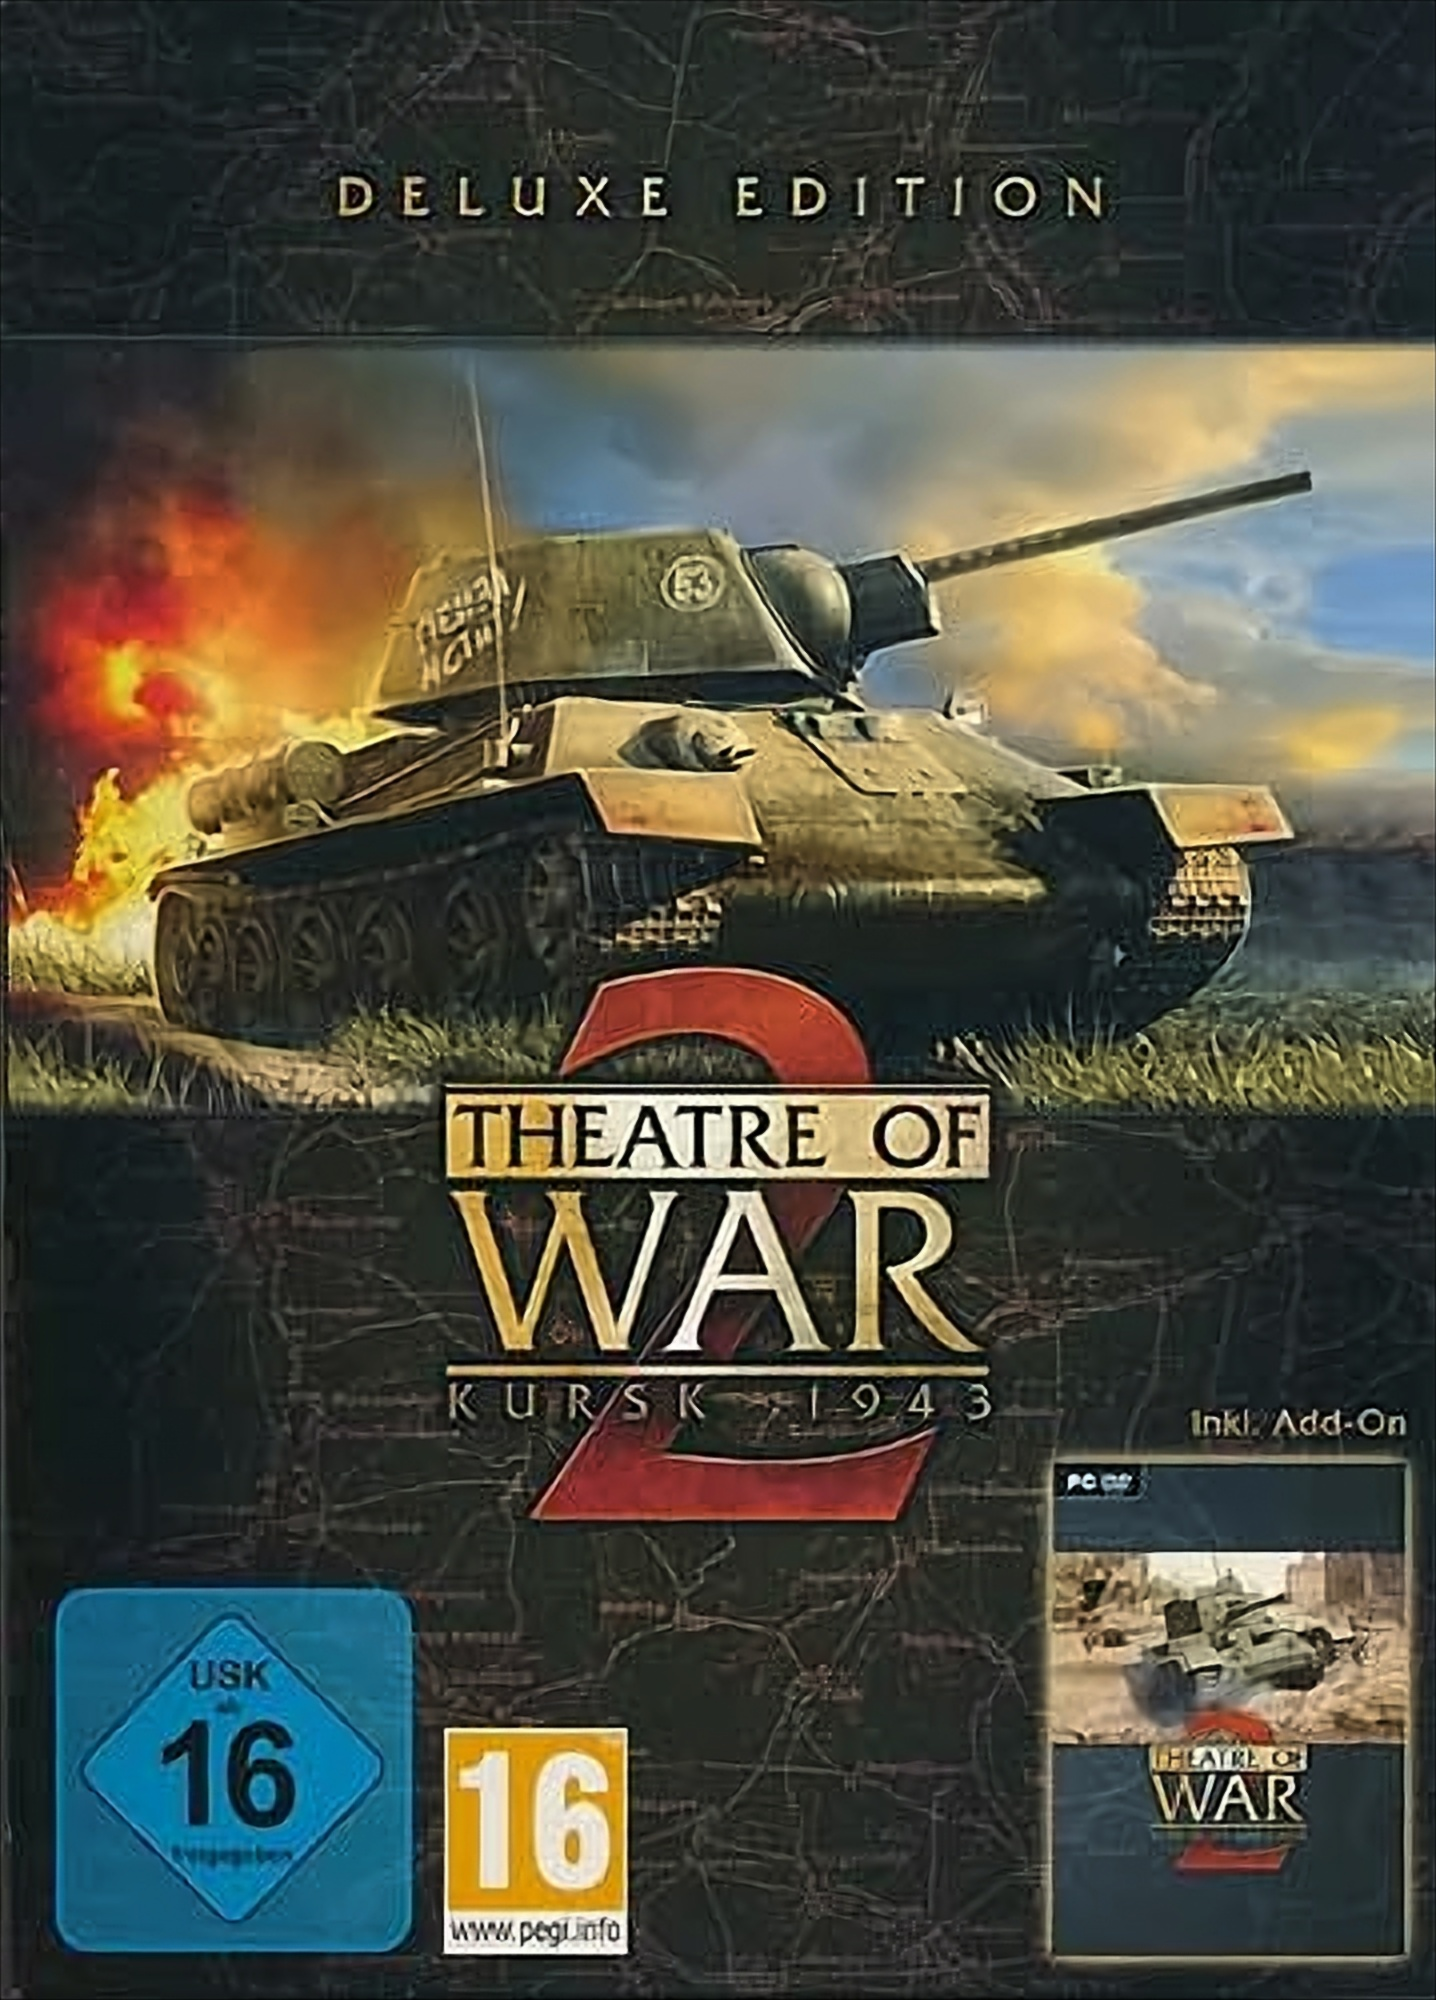 - Theatre War 1943 2: Of [PC] - Edition Deluxe Kursk